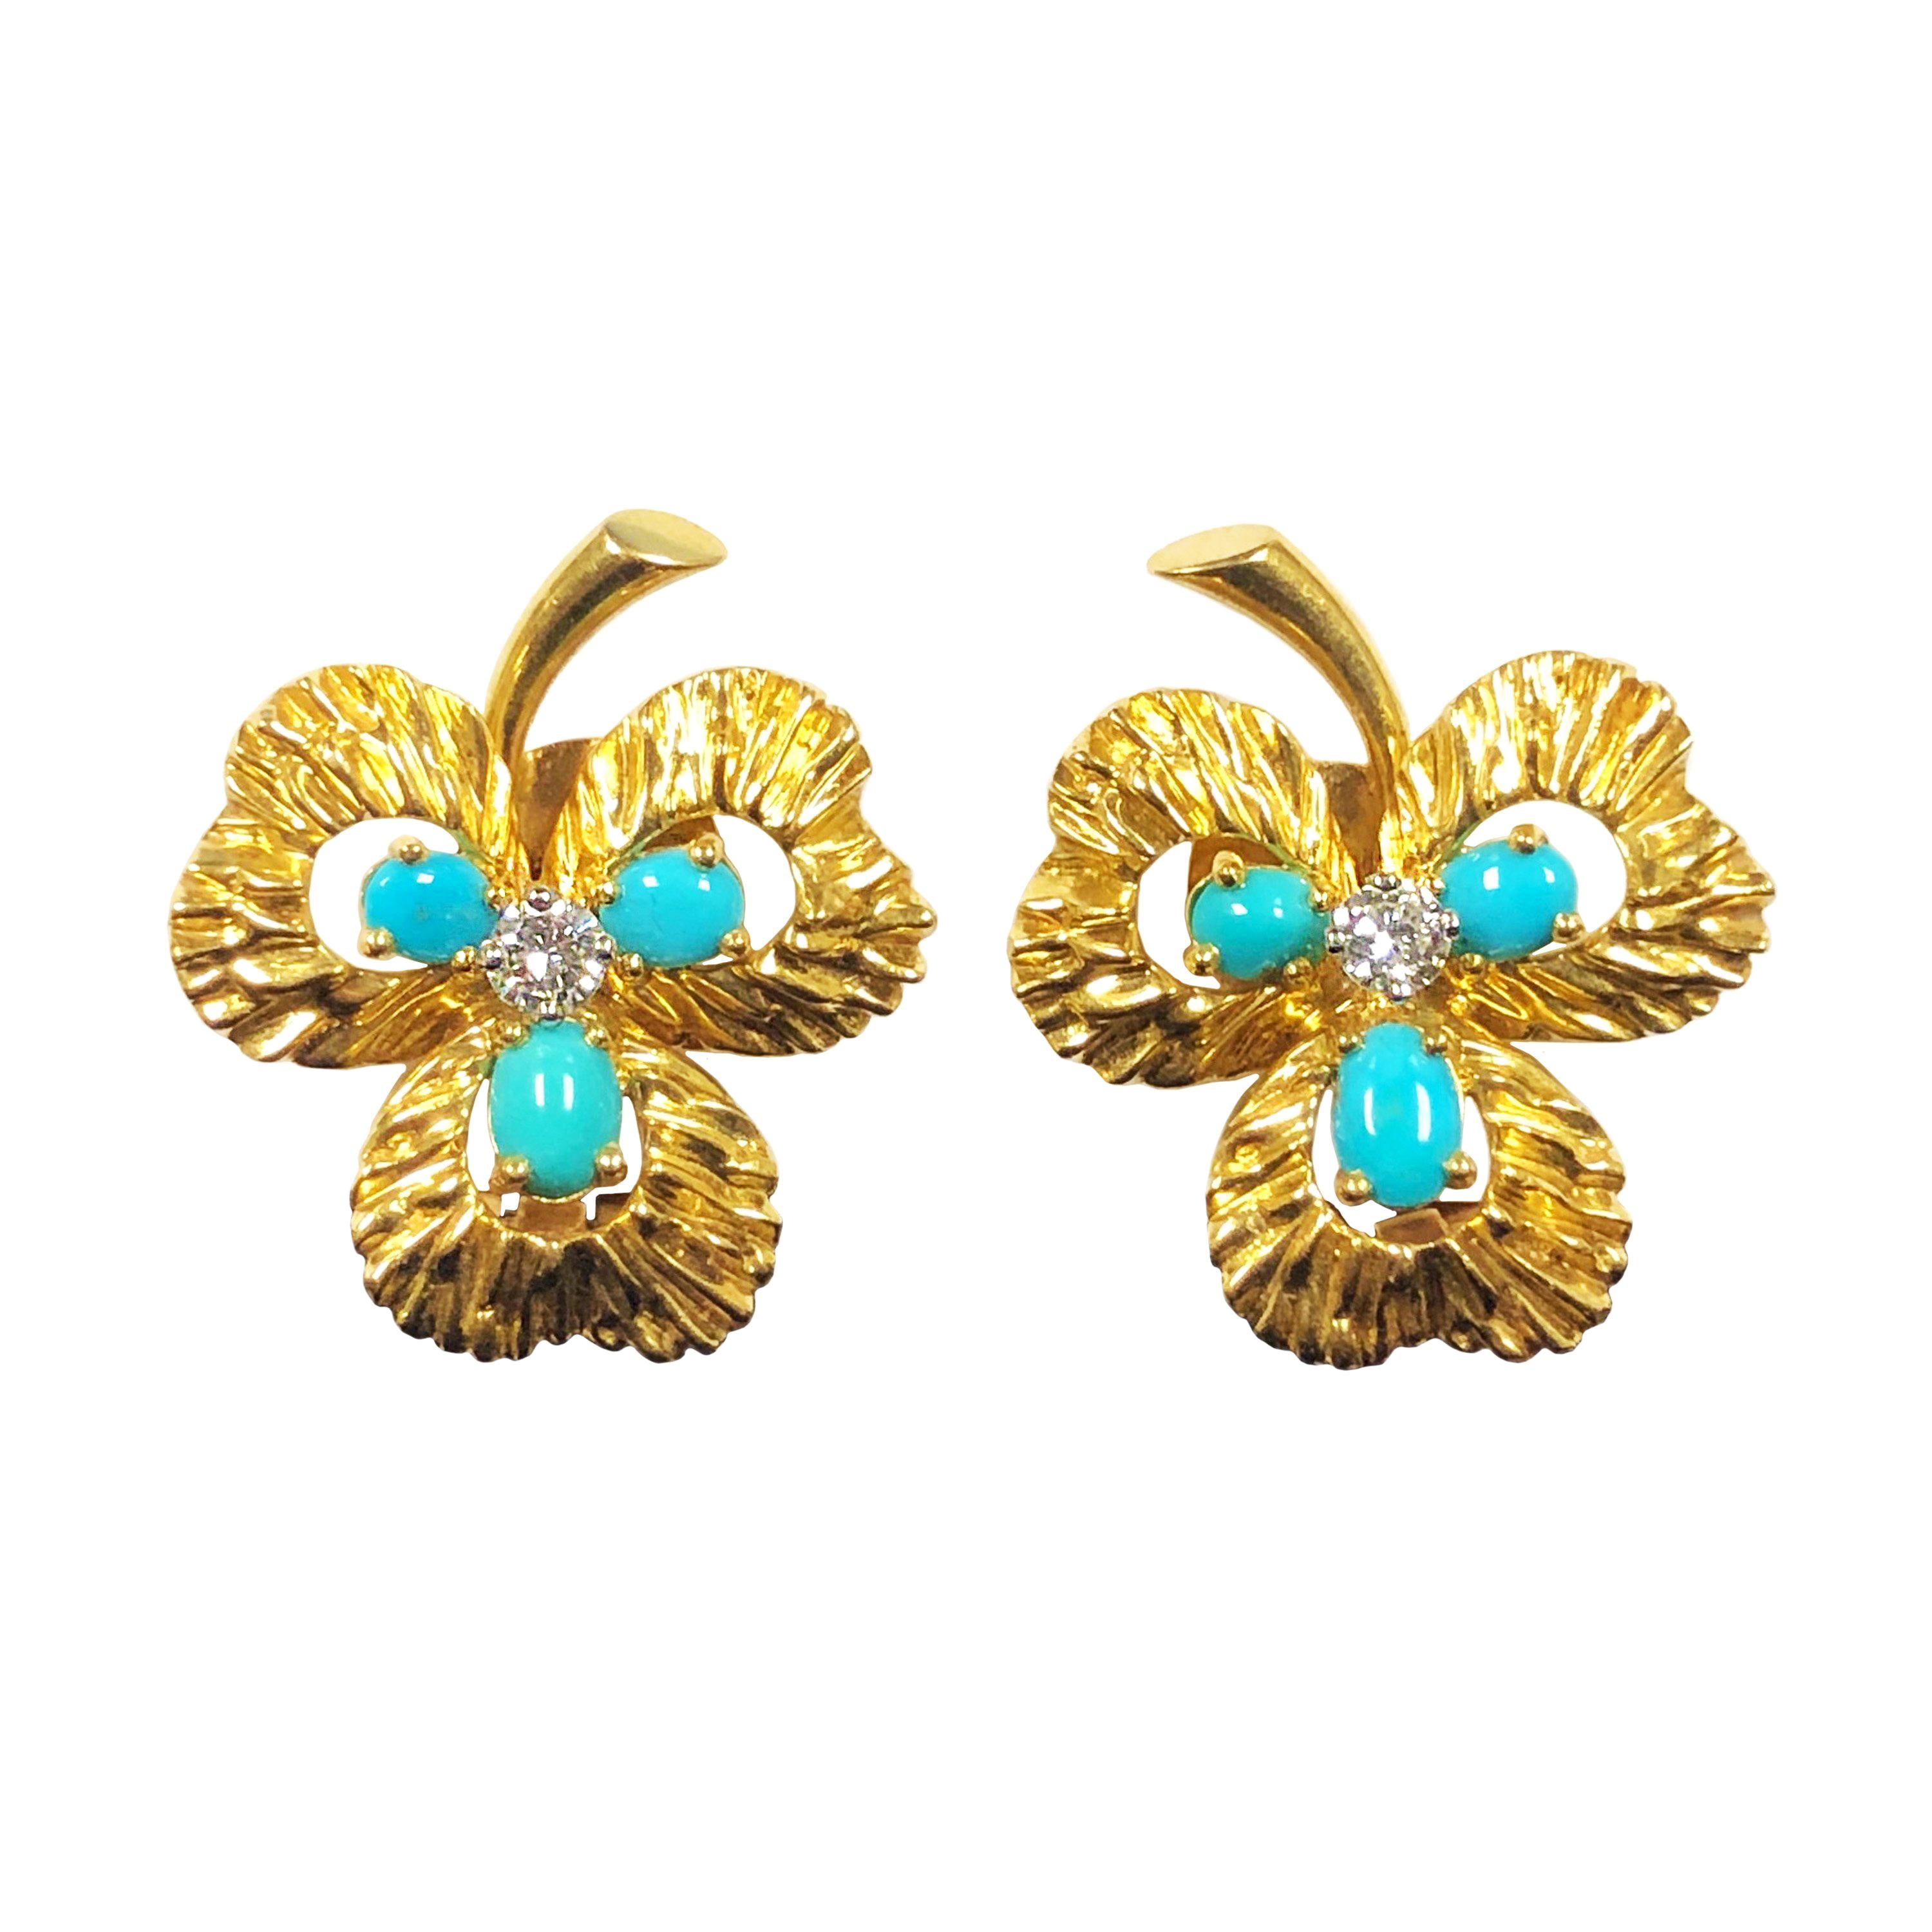 Van Cleef & Arpels France Gold Diamond and Turquoise Clover Leaf Earrings